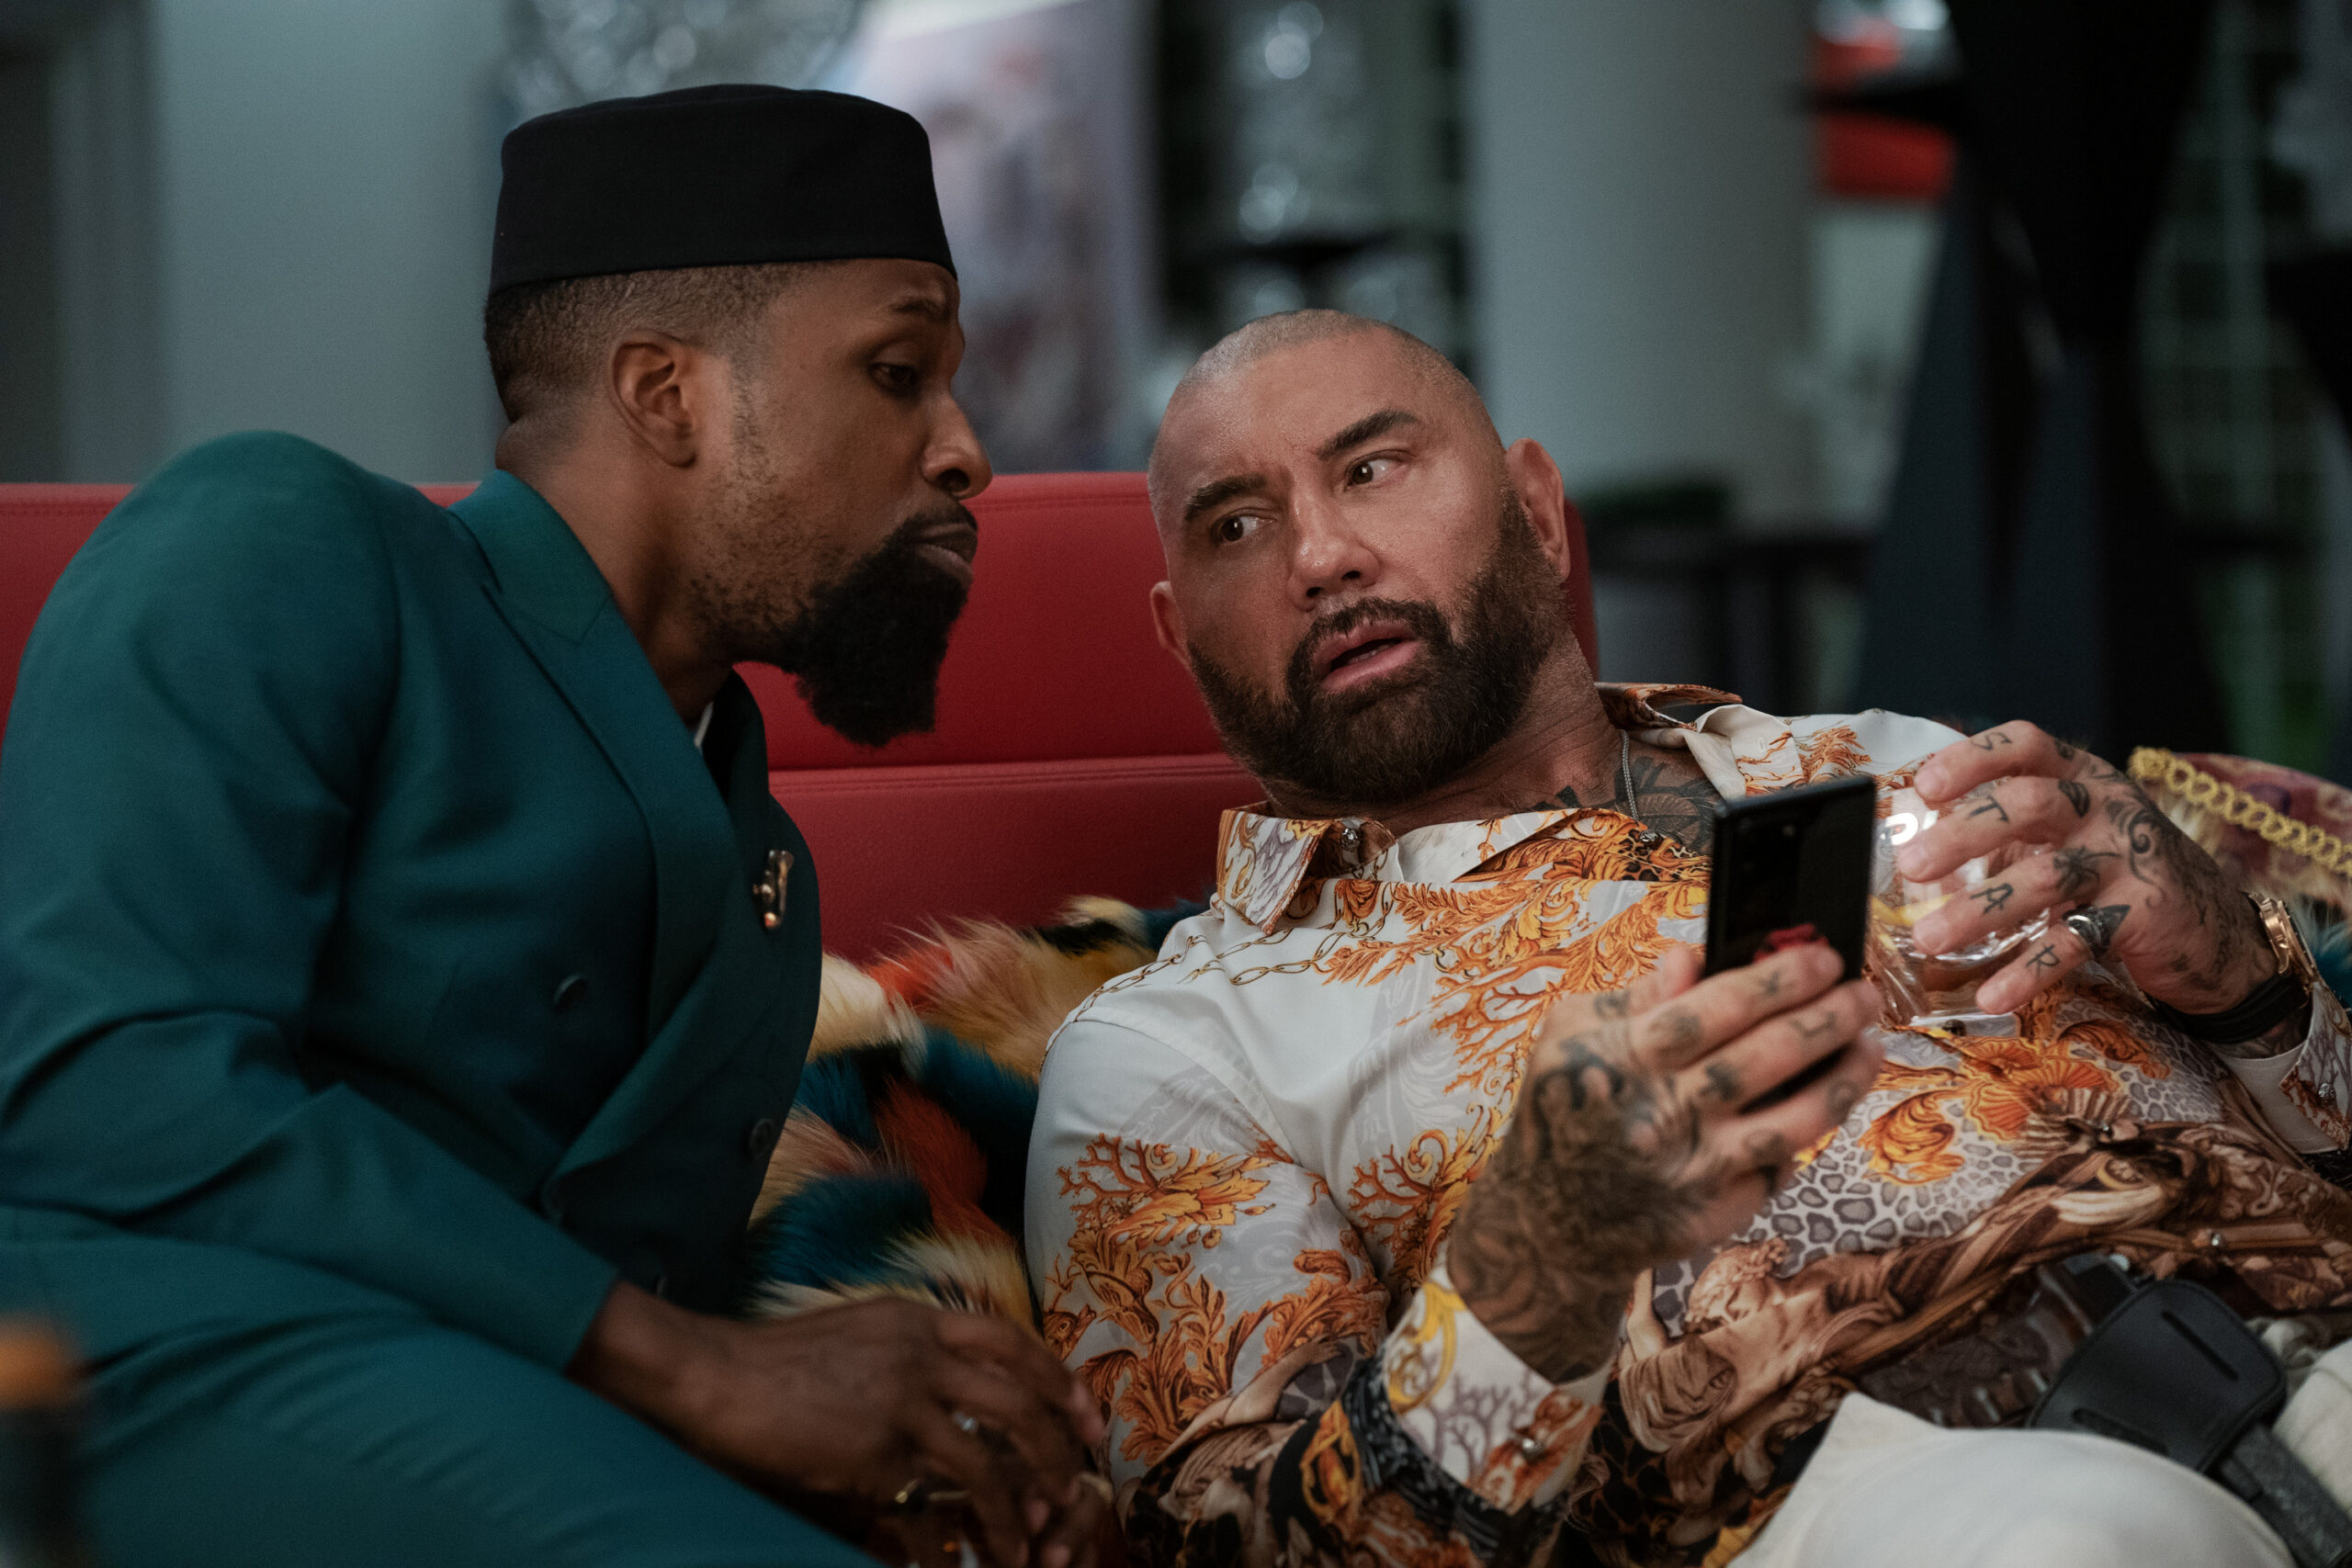 Glass Onion: A Knives Out Mystery (2022). (L-R) Leslie Odom Jr. as Lionel, and Dave Bautista as Duke. Cr. John Wilson/Netflix © 2022.